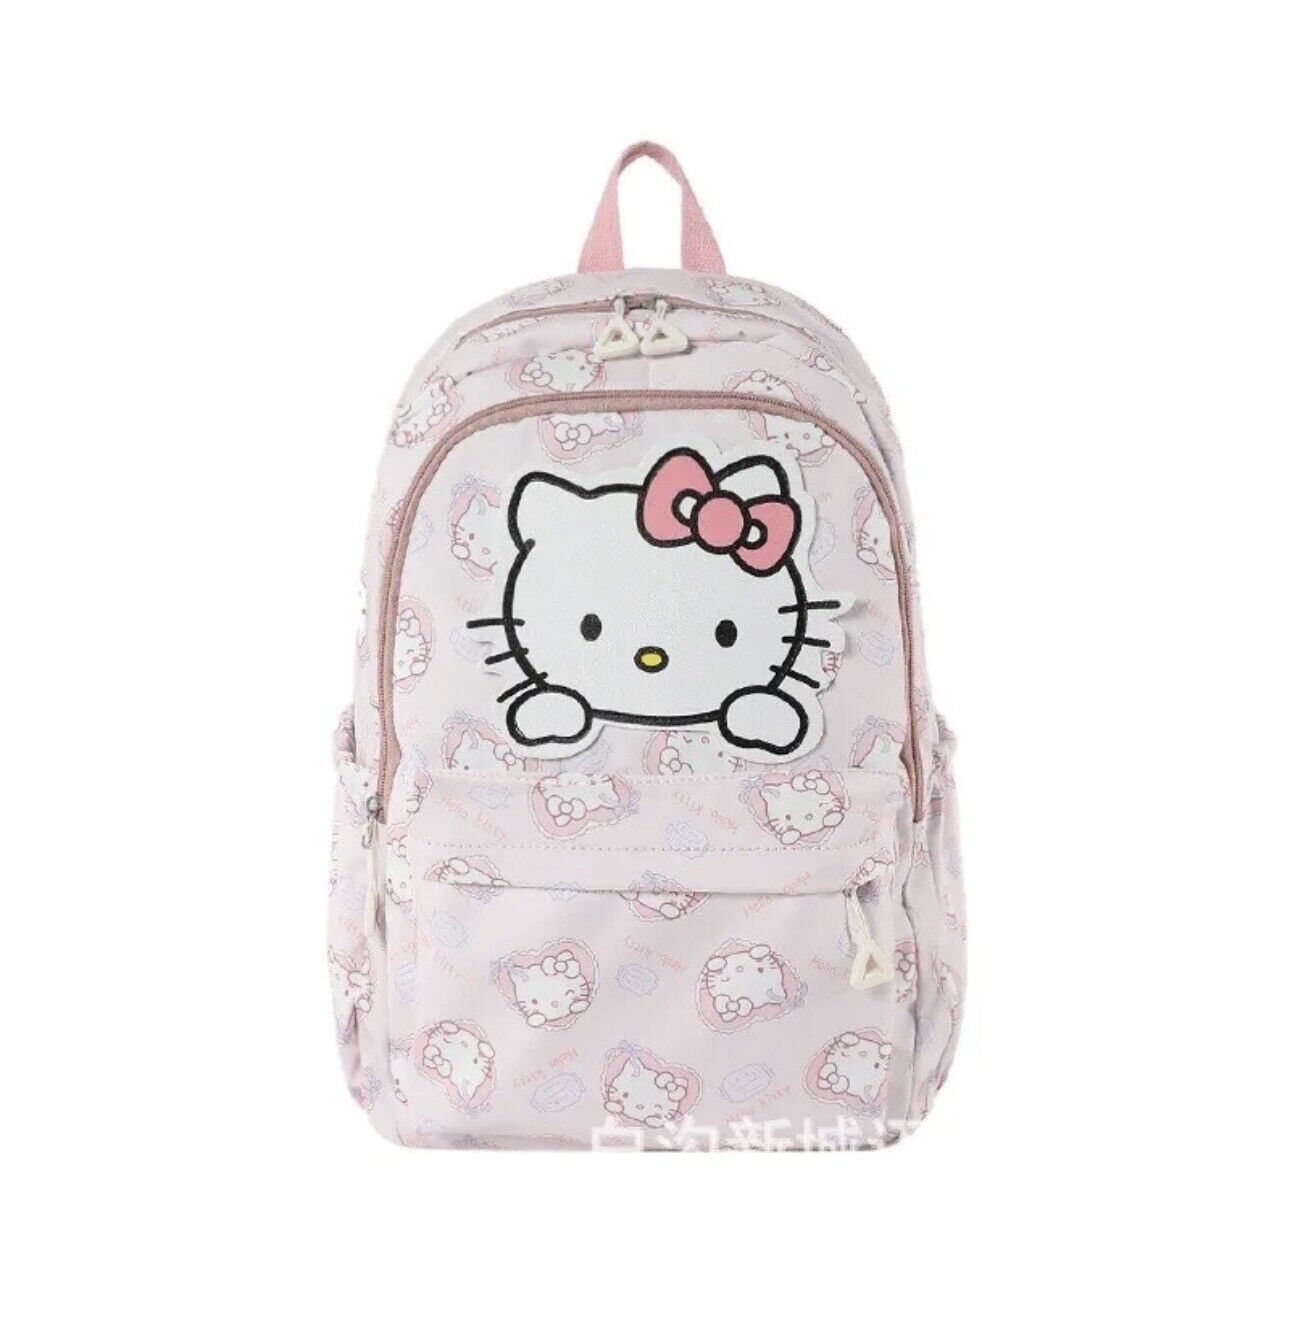 Sanrio super Cute Hello Kitty Backpacks with Side Pockets Large New US Seller